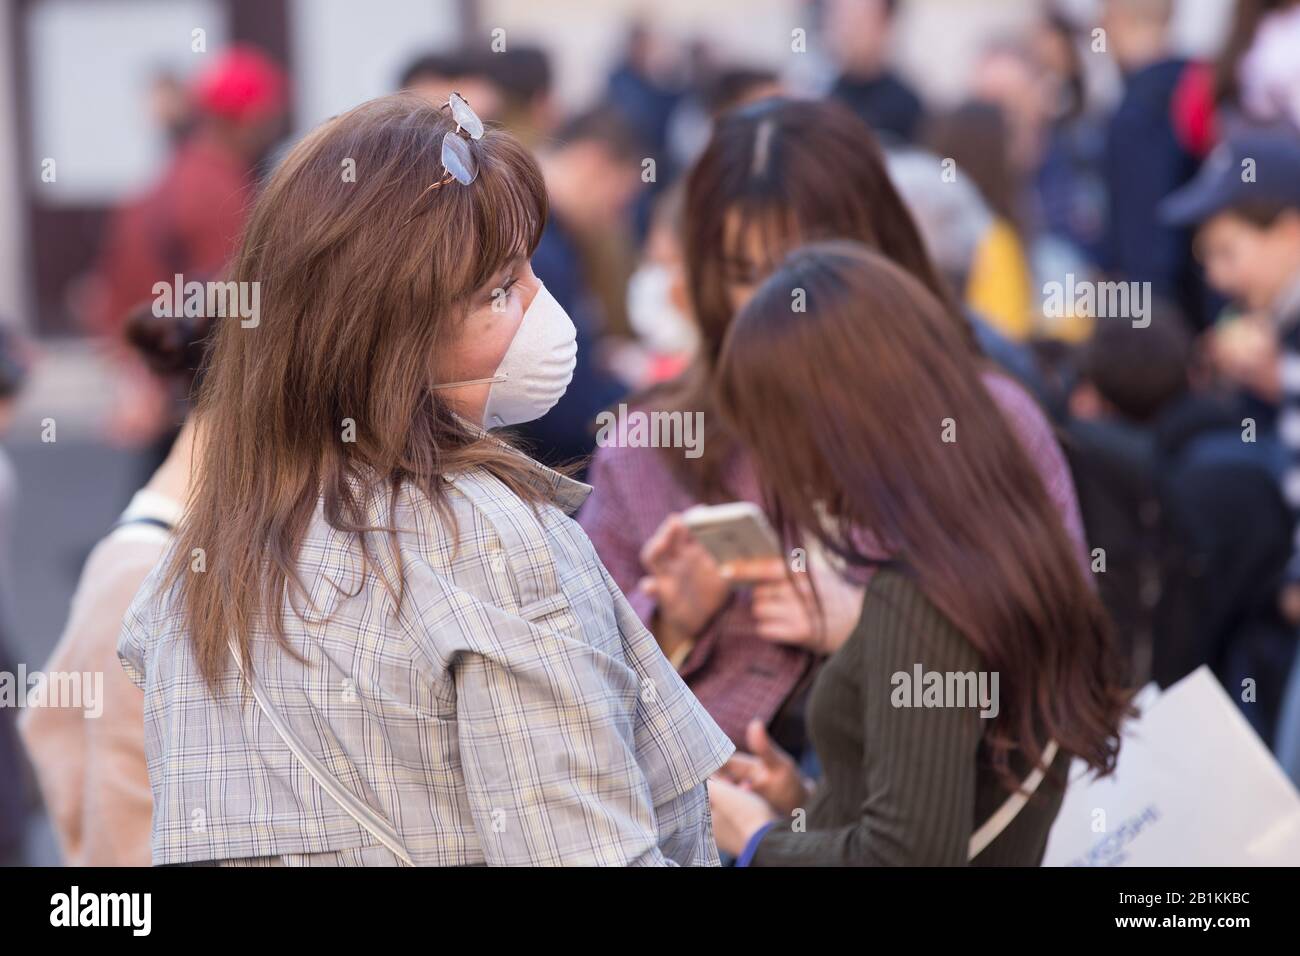 Roma, Italy. 25th Feb, 2020. People wear antivirus masks to protect themselves from Corovinavirus in Rome, in Piazza della Rotonda, in front of the Pantheon (Photo by Matteo Nardone/Pacific Press/Sipa USA) Credit: Sipa USA/Alamy Live News Stock Photo